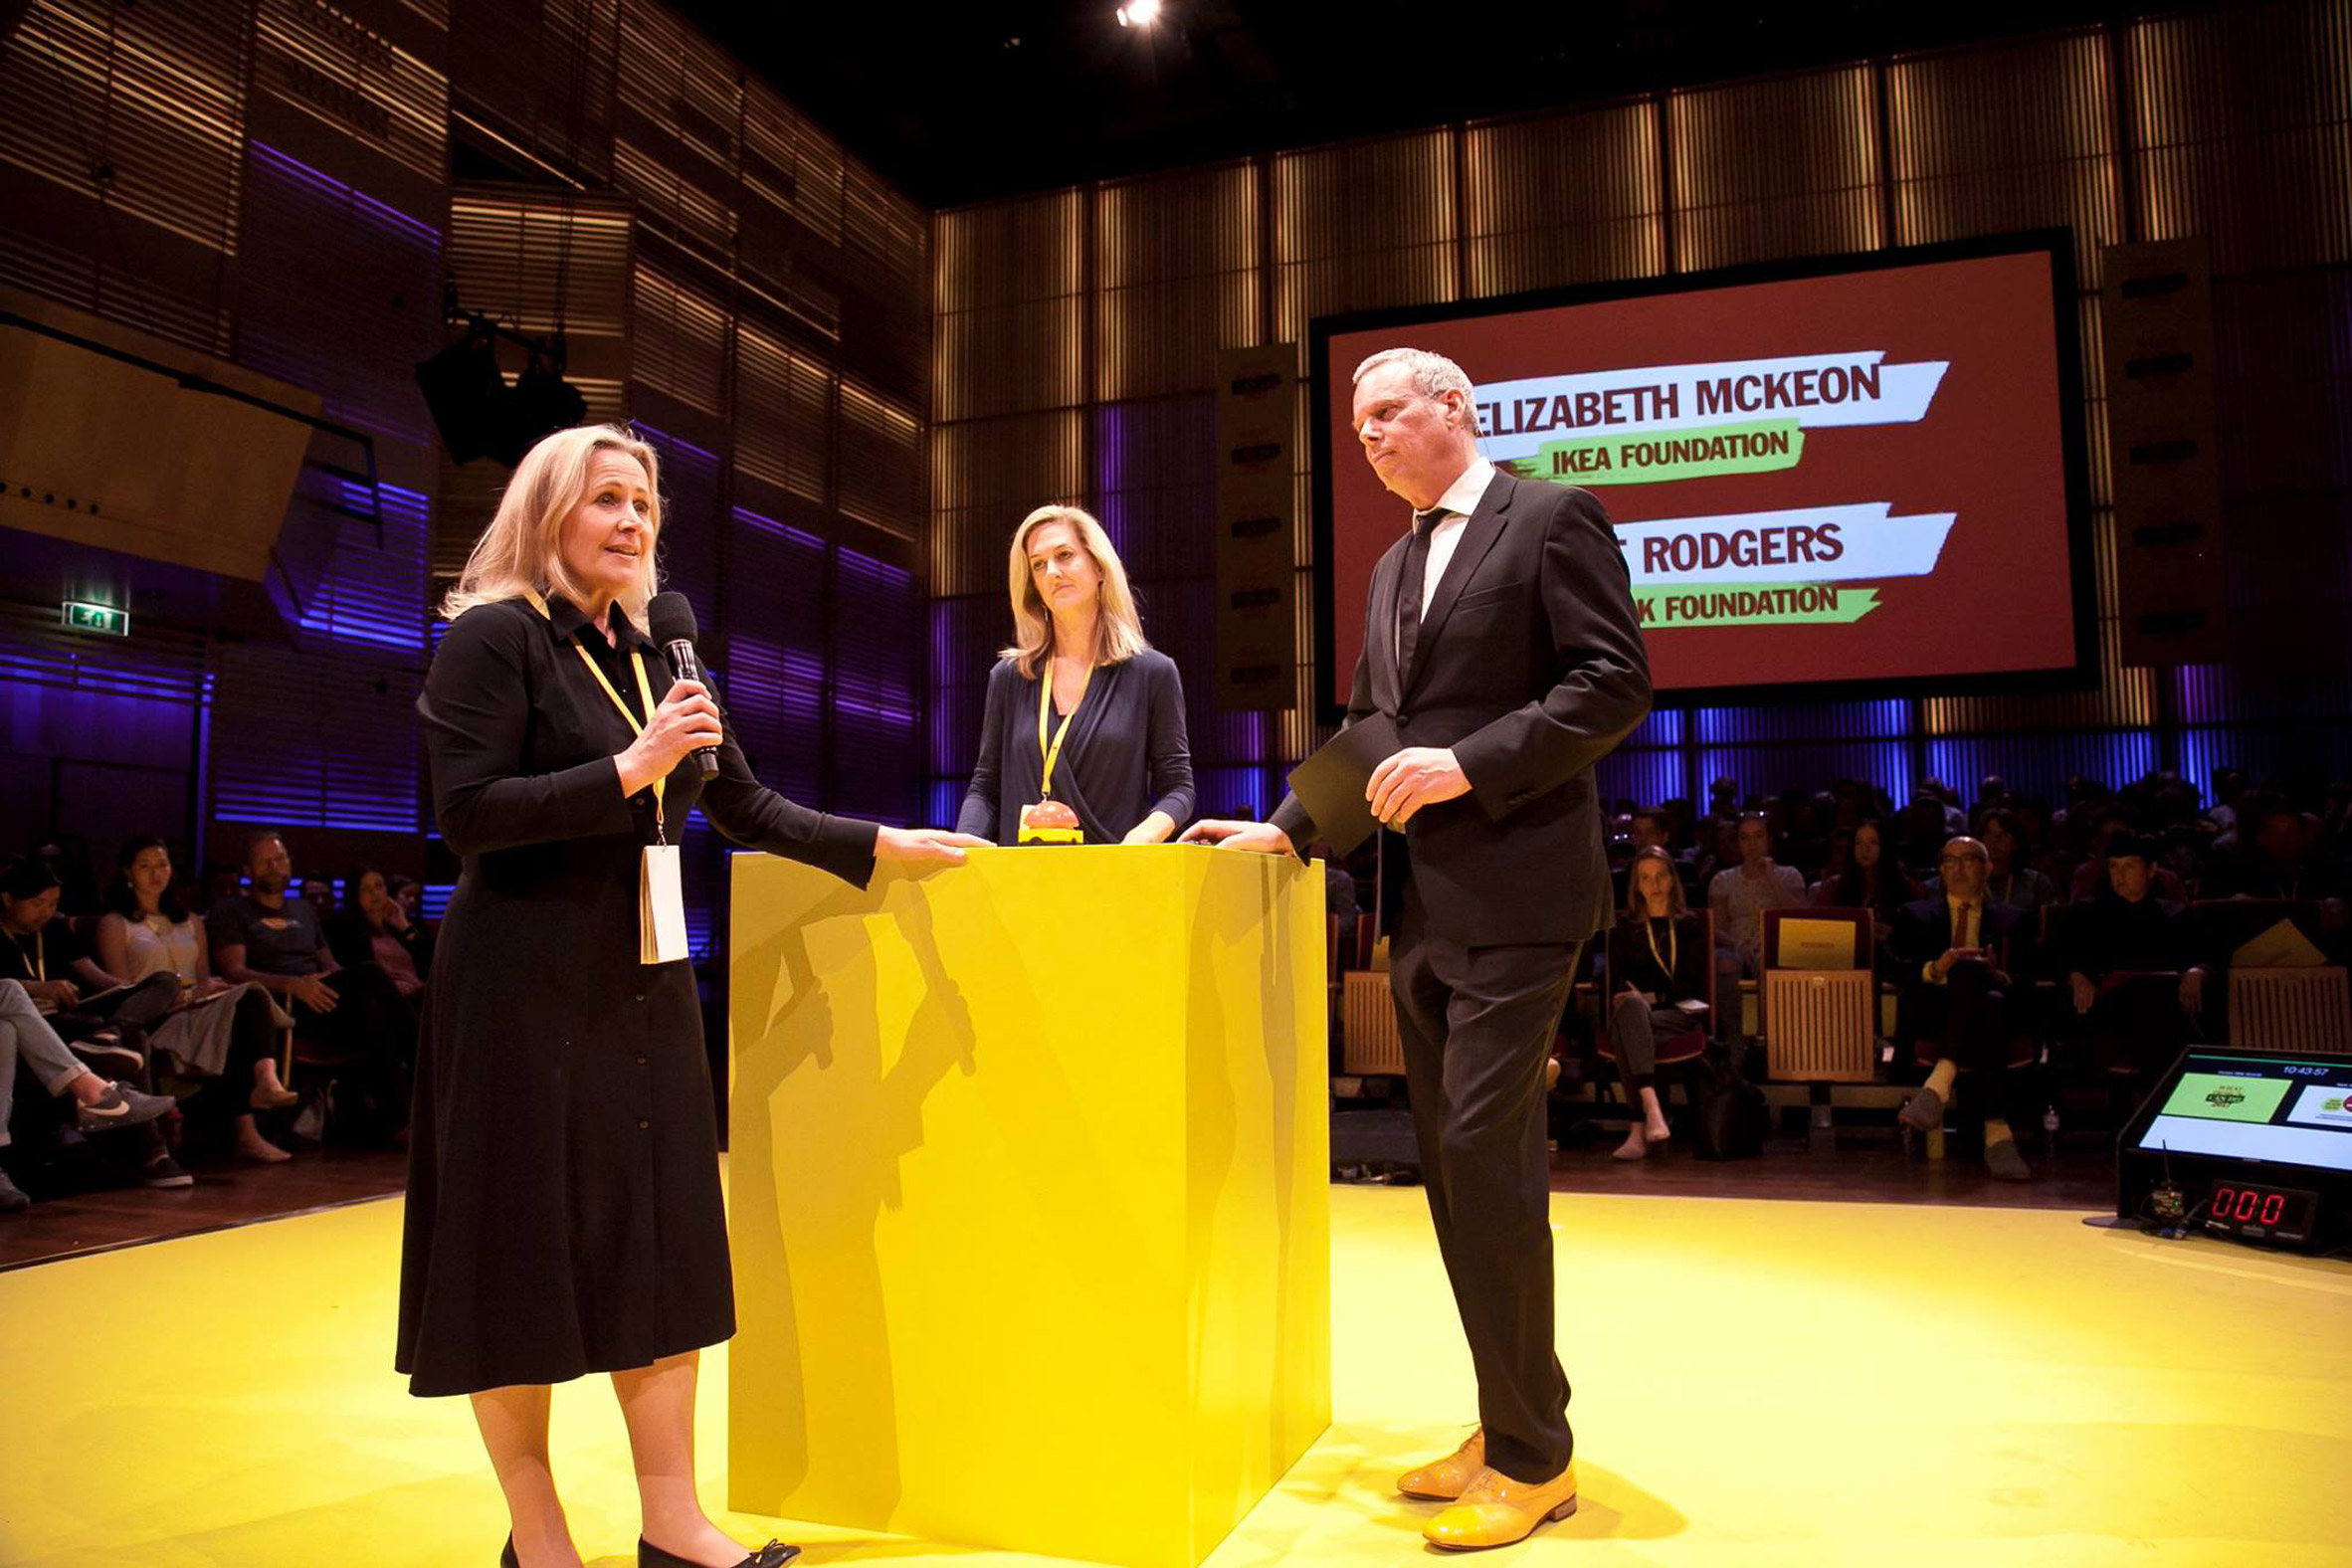 The Climate Action Challenge was launched at WDCD 2017